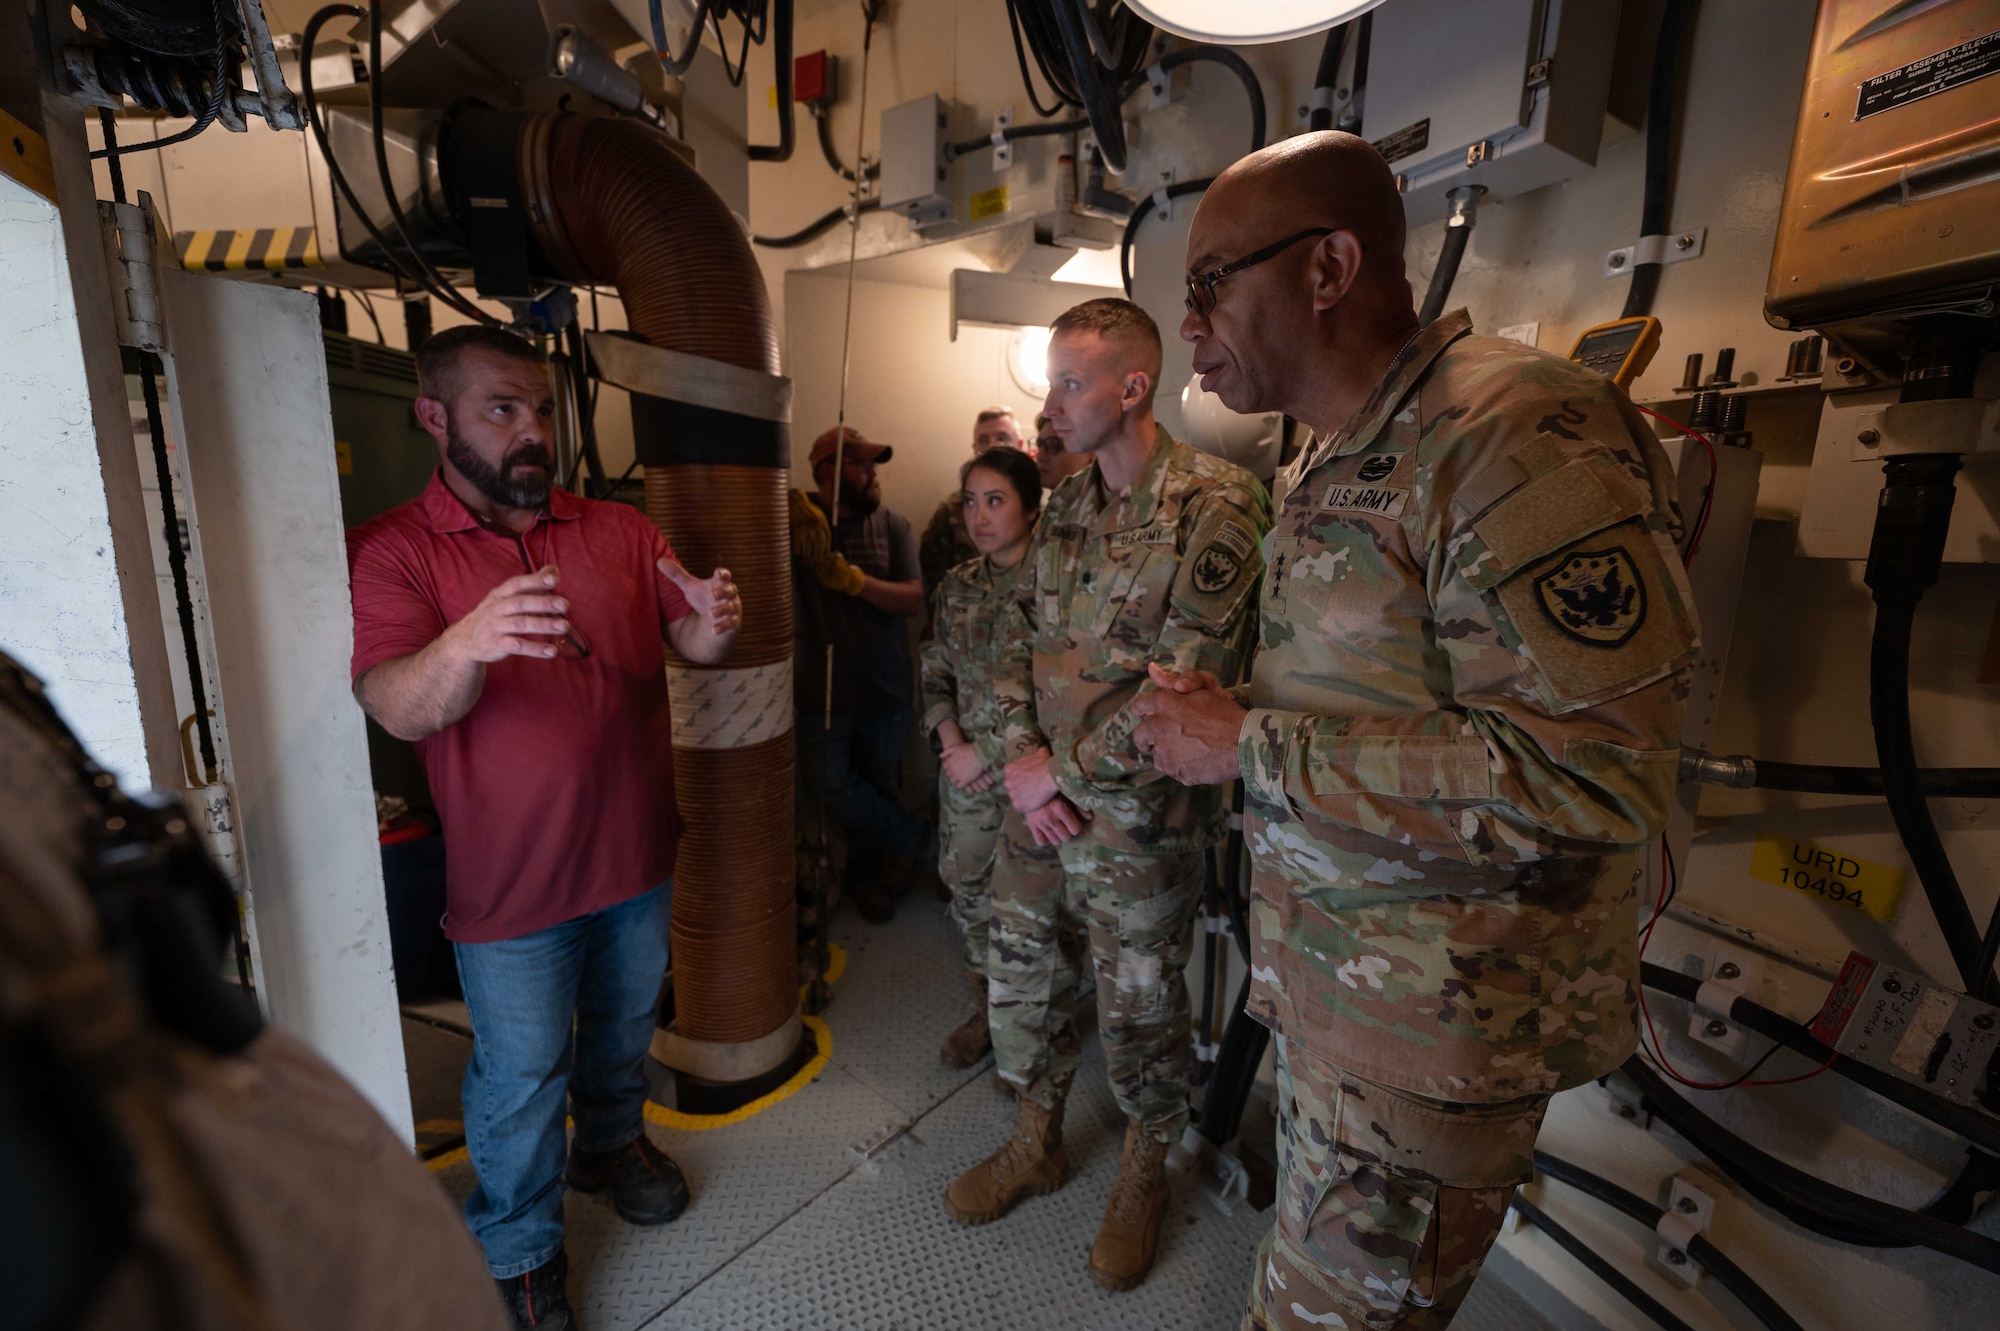 Jeff Erickson, 583rd Missile Maintenance Squadron production superintendent, gives U.S. Army Lt. Gen. A.C. Roper, deputy commander of U.S. Northern Command, a tour of the Bravo-02 launch facility near La Grange, Wyoming, June 13, 2023. Roper came to the 90th Missile Wing to tour a launch facility, missile alert facility, and to see first-hand how an intercontinental ballistic missile mission operates in support of homeland defense. (U.S. Air Force photo by Senior Airman Sarah Post)